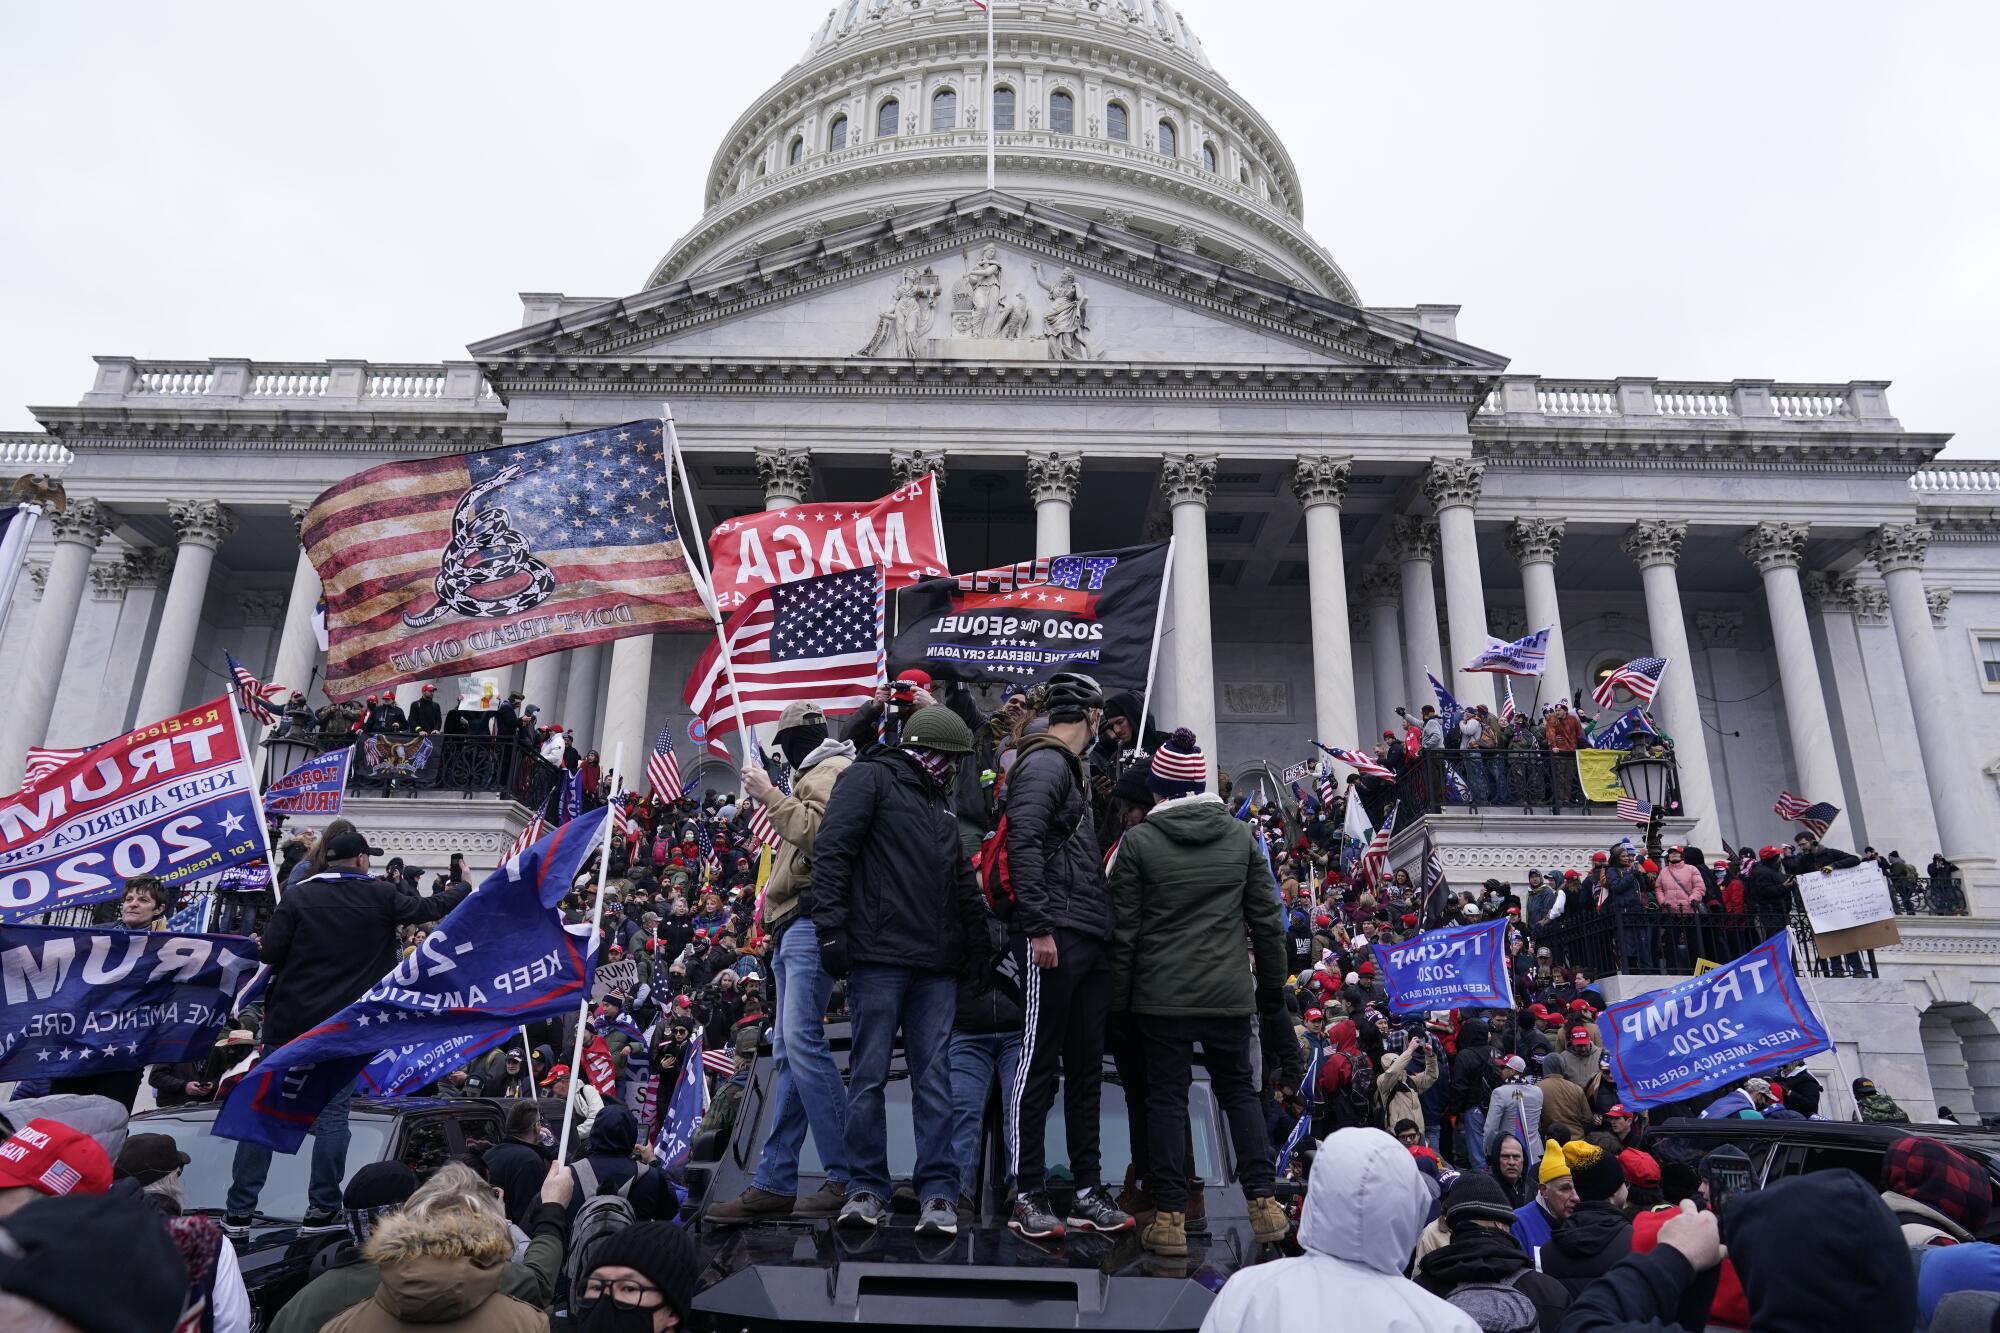 A pro-Trump crowd is gathered in front of the U.S. Capitol